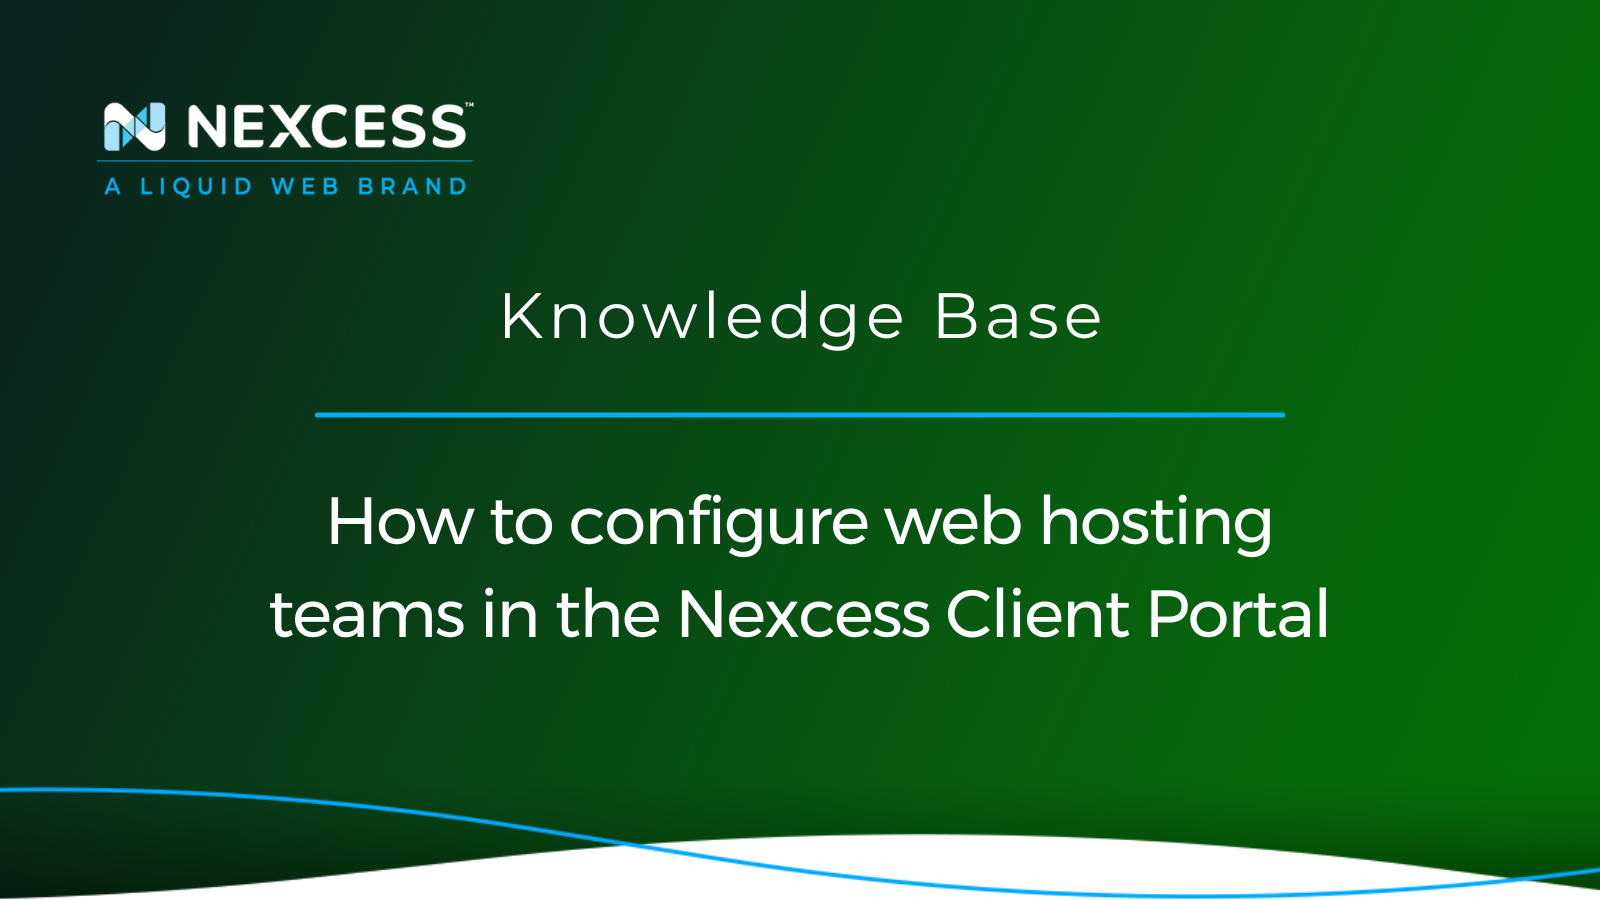 How to configure web hosting teams in the Nexcess Client Portal